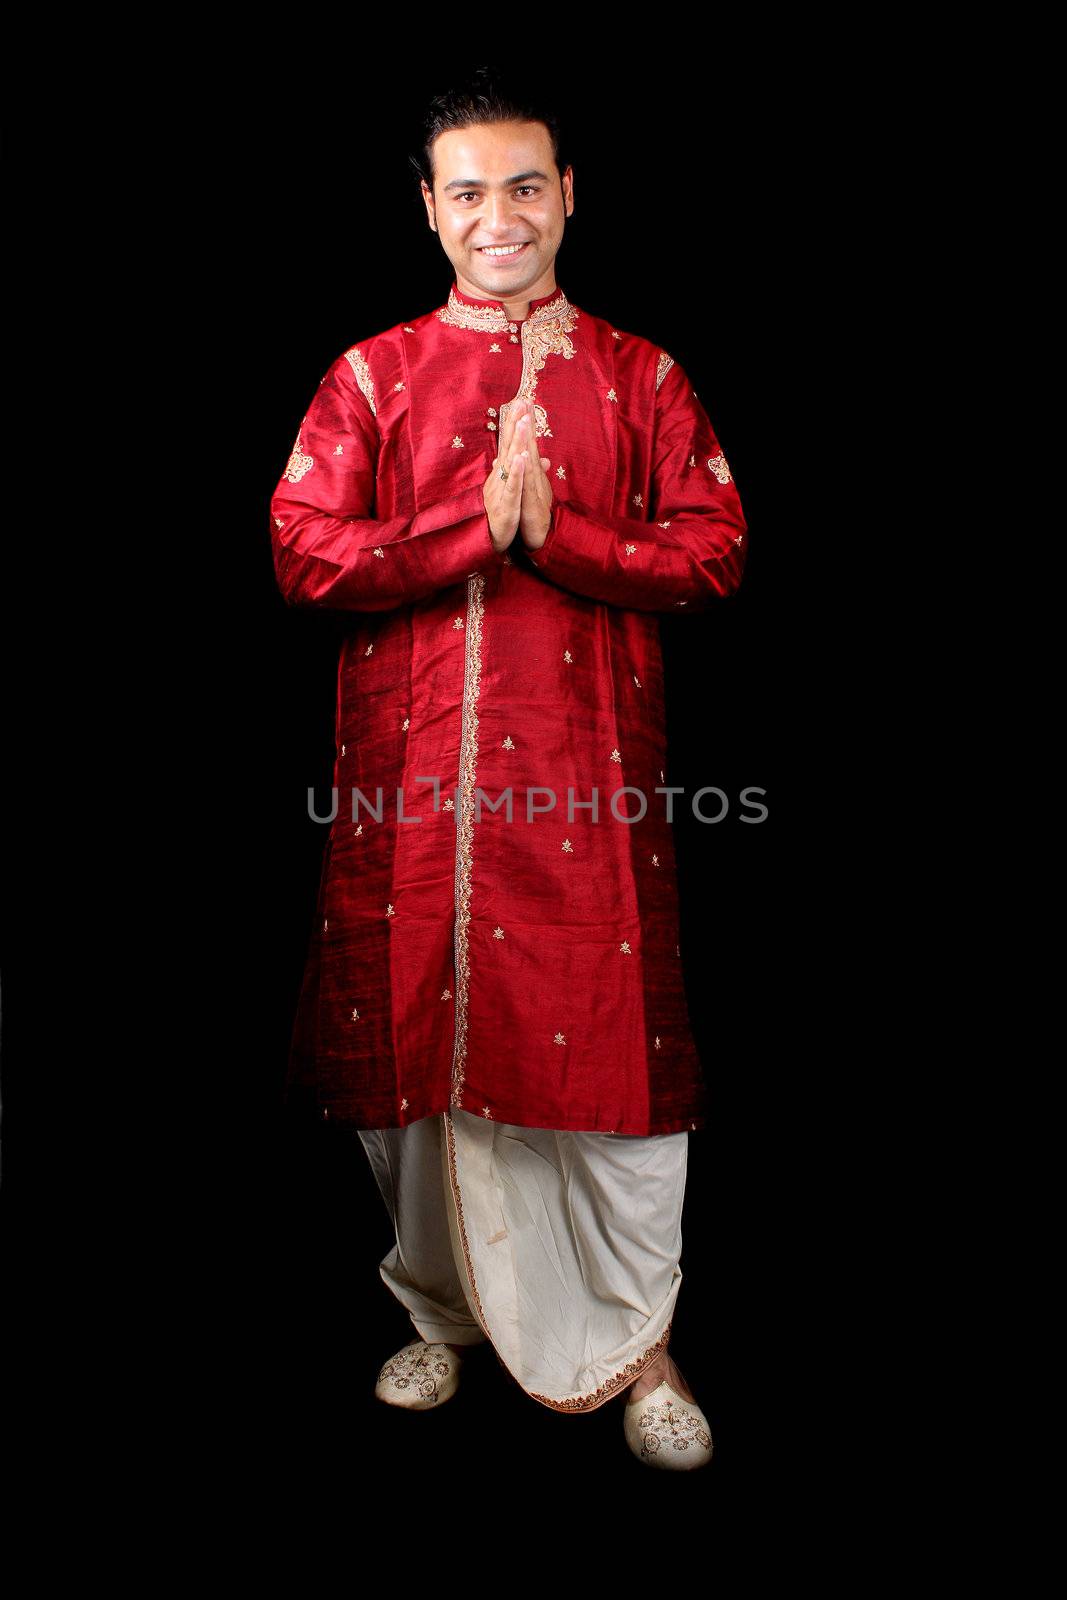 A handsome young Indian guy in a traditional Indian welcome pose, on black studio background.